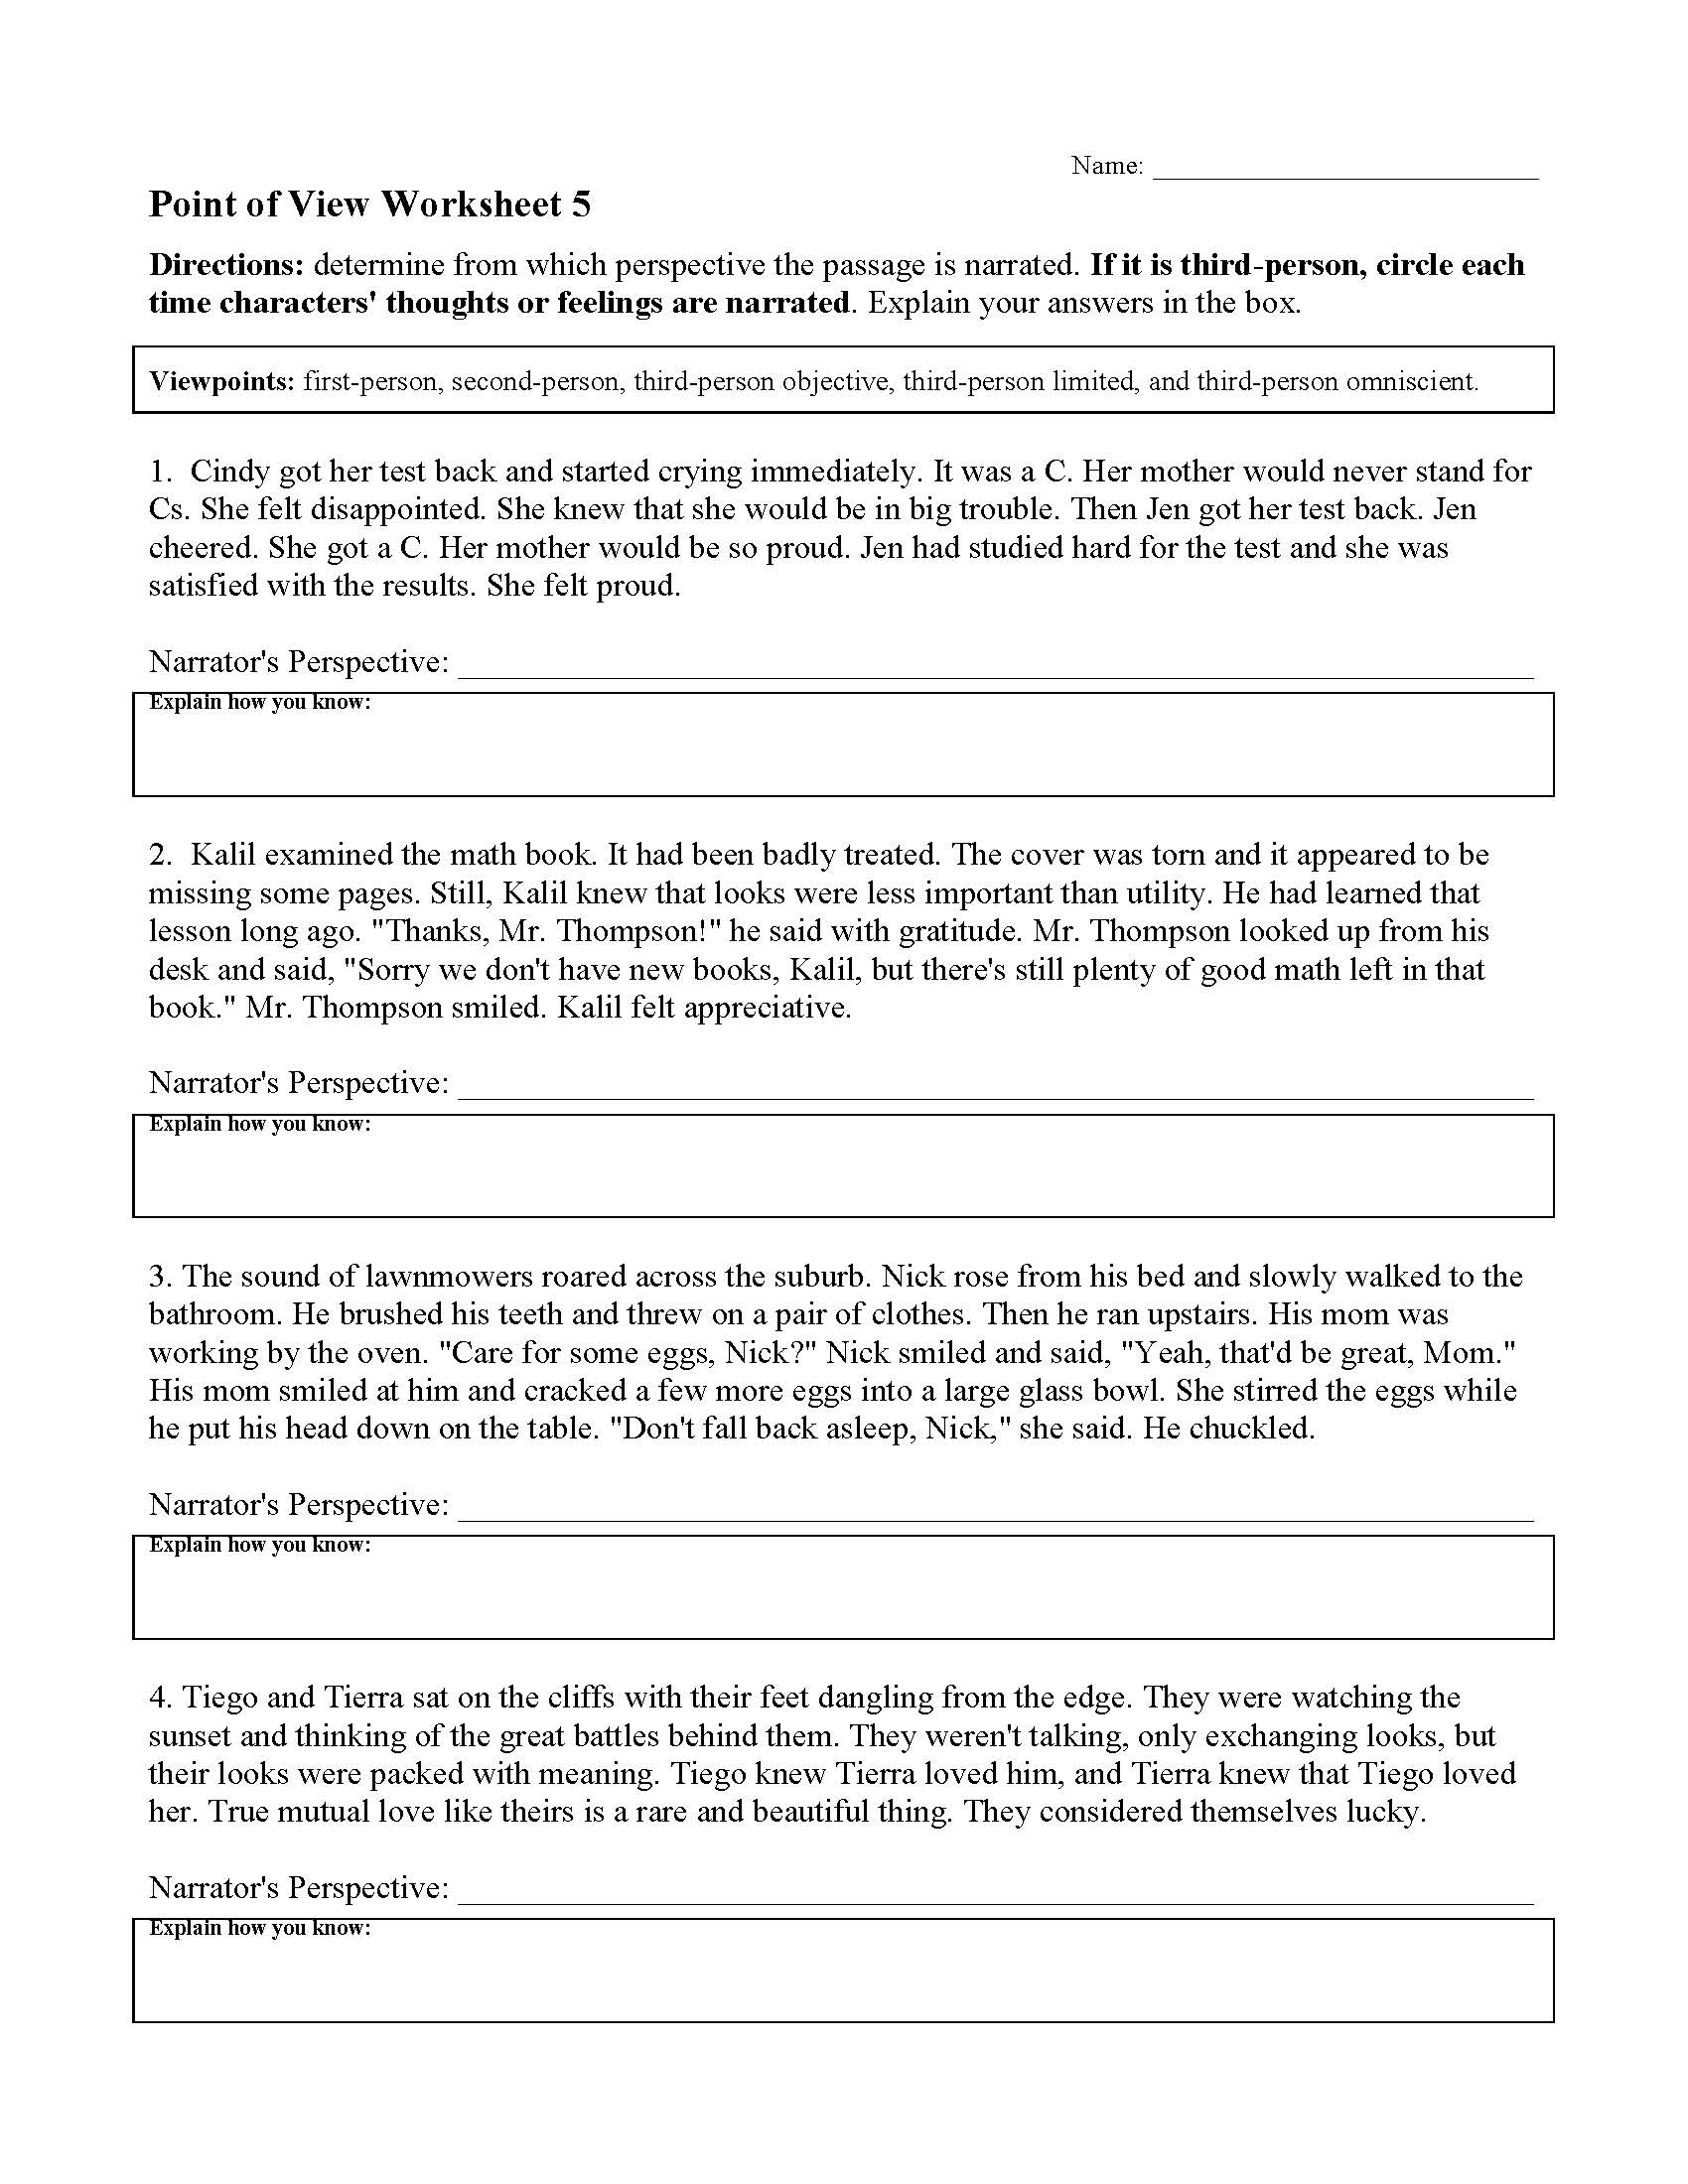 point-of-view-worksheets-5th-grade